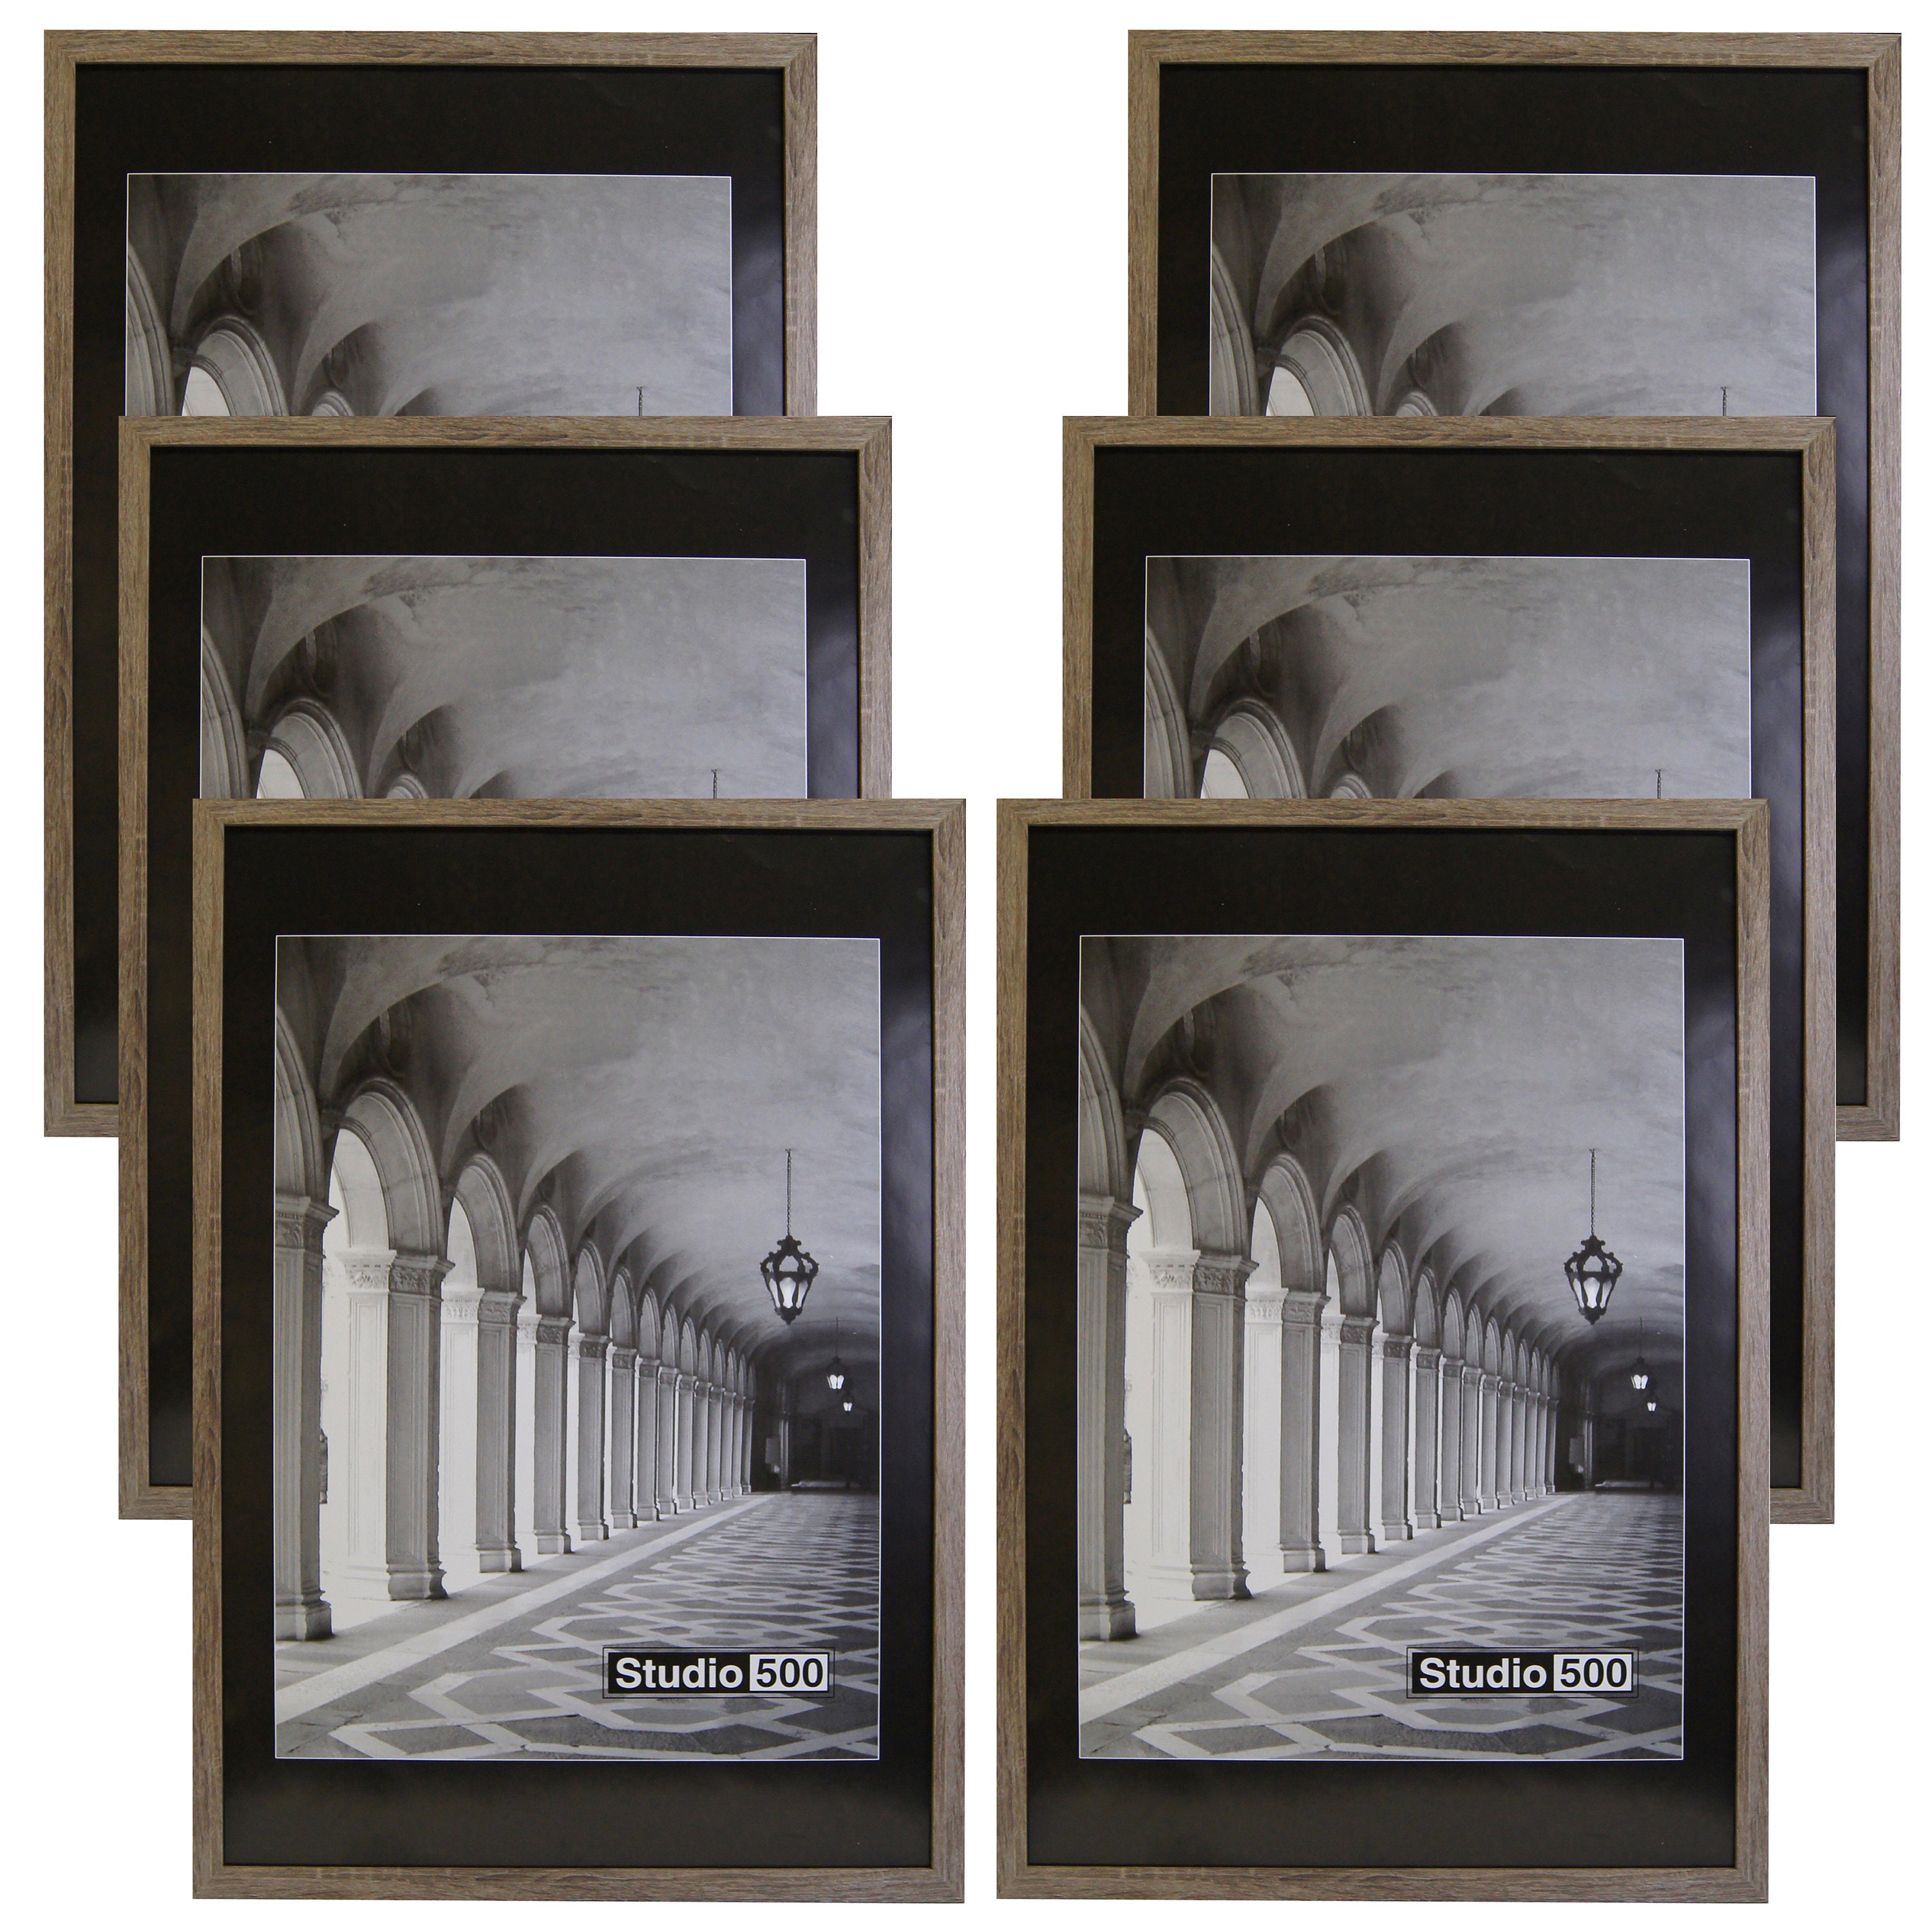 Basic Simple Wood Frame for Poster Photography. 3 Colors: Natural, Black,  Walnut. Frames Any Size 11x14 18x24 24x36 15x21 30x40 30x30 50x70 